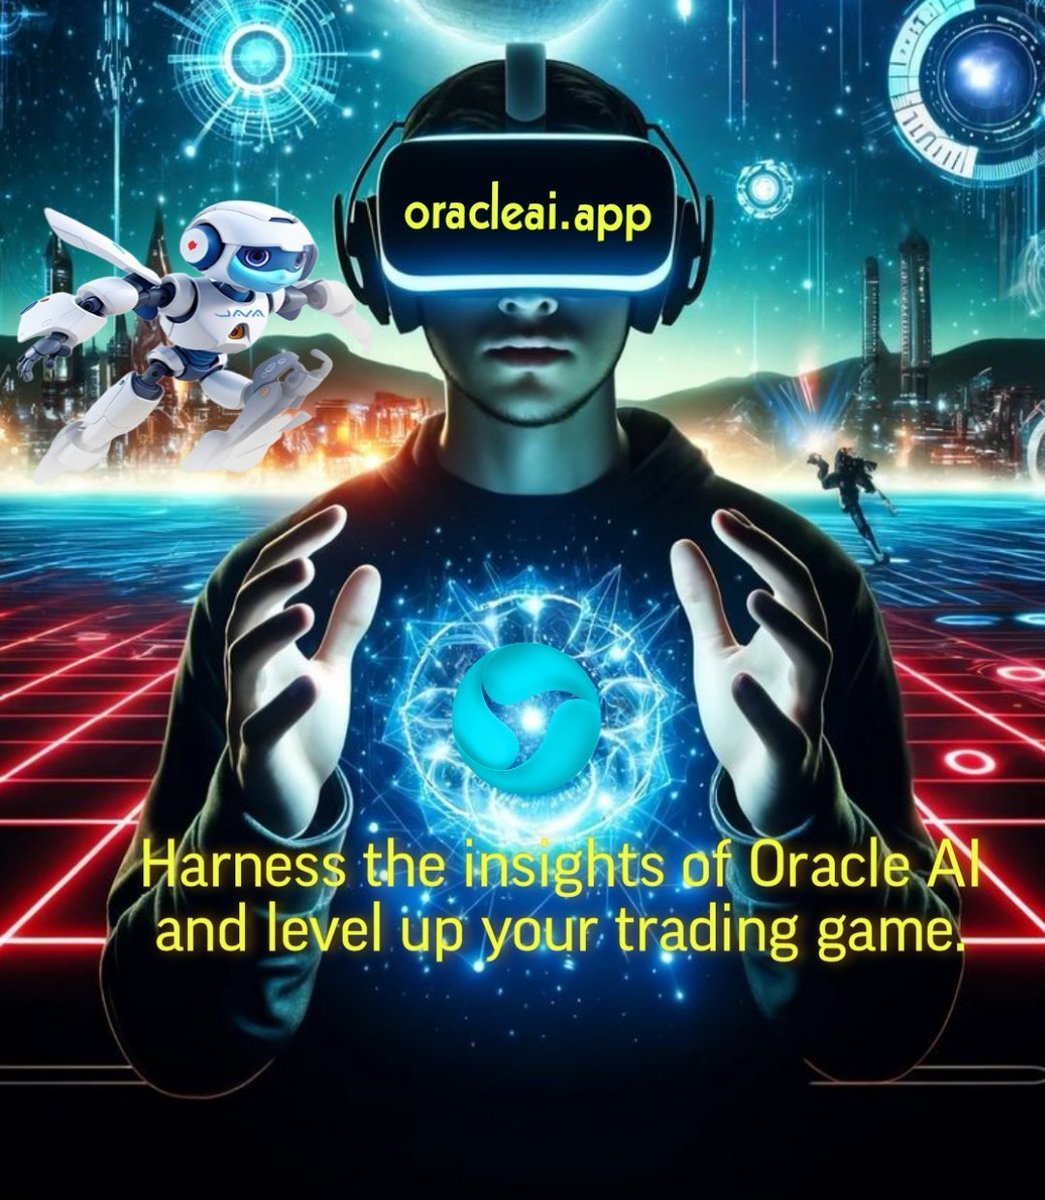 Don't just follow trends, predict them. Dive into Oracle AI for unparalleled market insights

$ORACLE

Check us out: @oracleai_erc

#EliteMarketingArmy #Cryptomarket #AI
#SmartInvesting